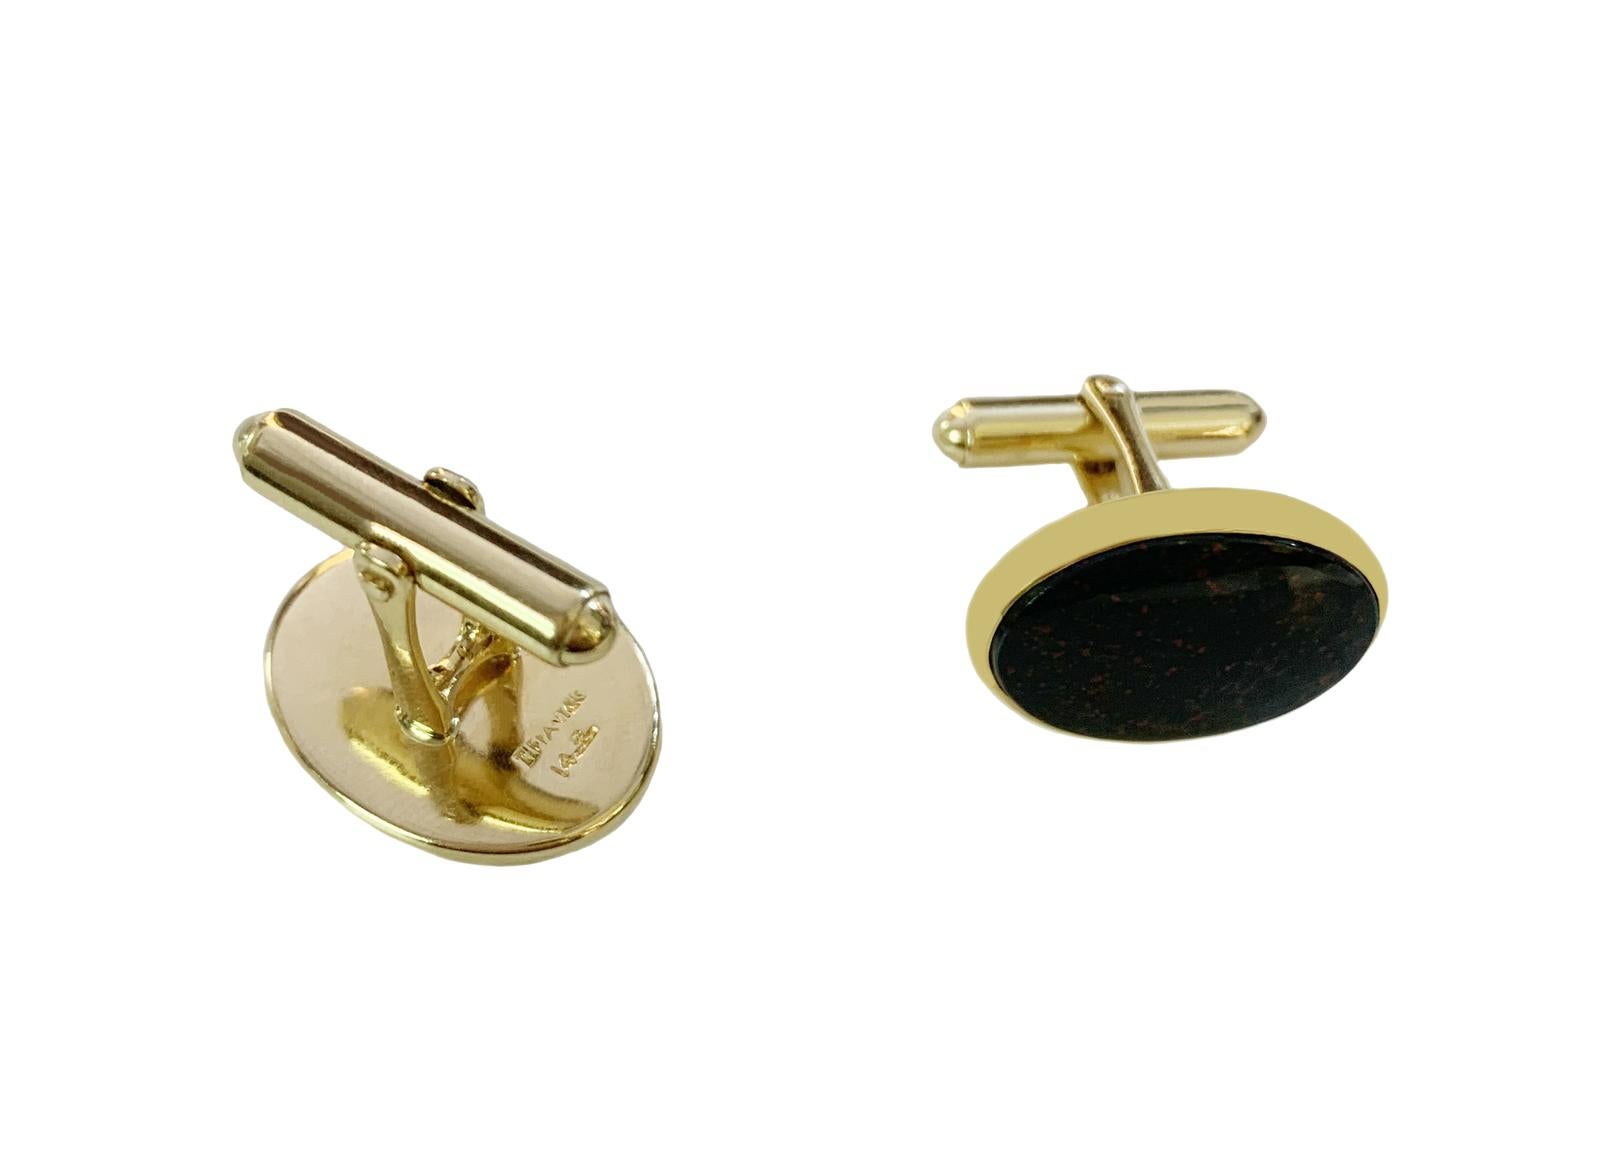 TIFFANY & CO. HELIOTROPE (BLOODSTONE) 14K GOLD CUFFLINKS

-Mint condition
-14k Yellow Gold
-Weight: 11.6gr
-Dimension: 16x21mm
-Comes with Tiffany pouch